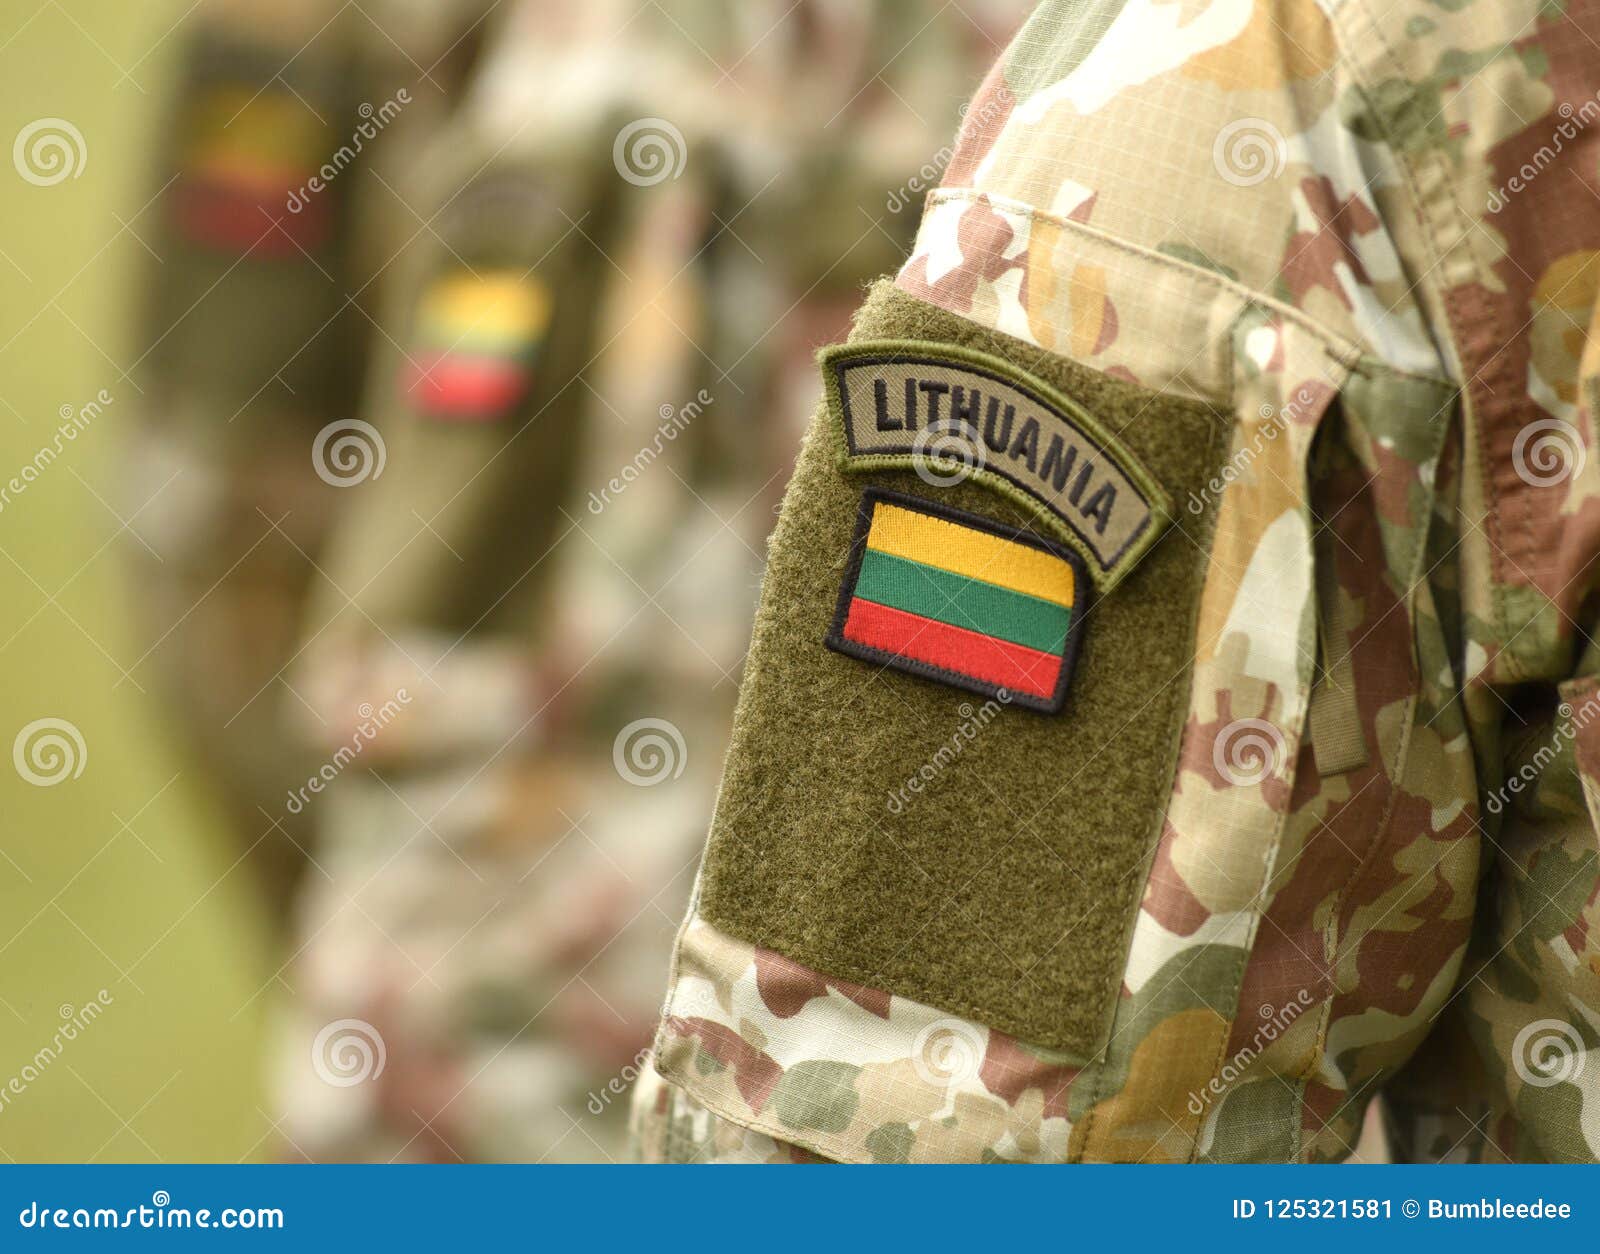 Lithuania Lithuanian Armed Forces Air Force Emblem Patch